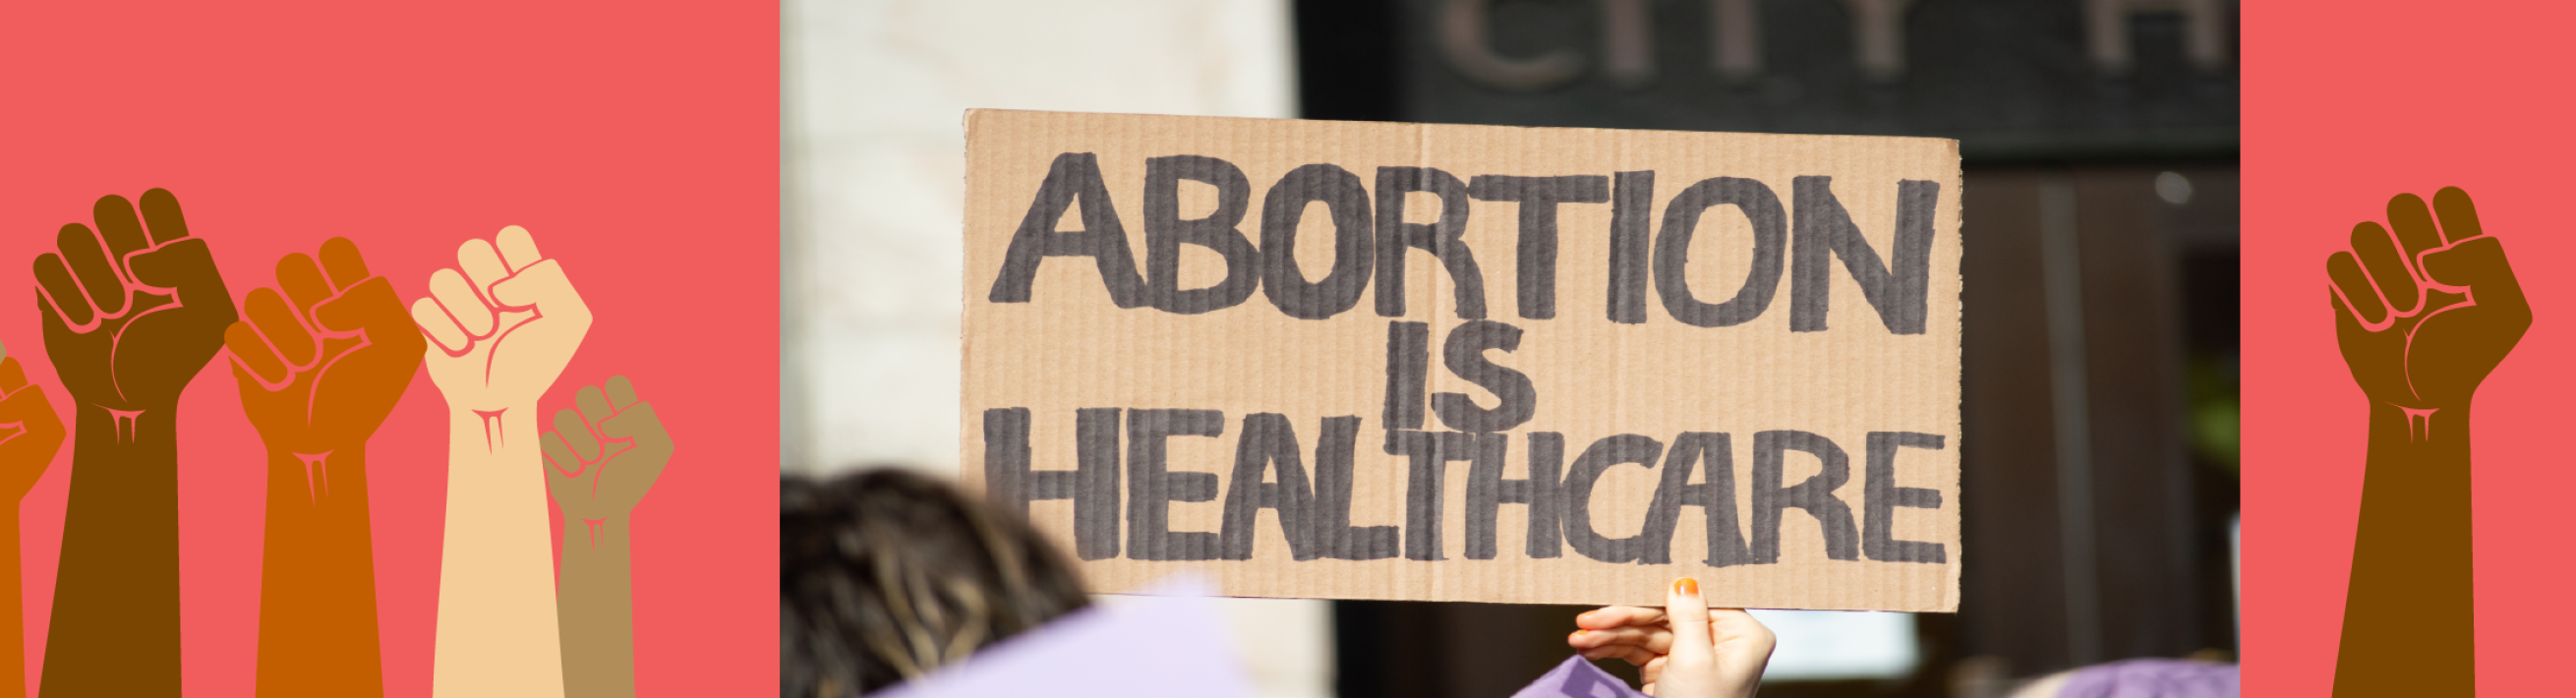 A cardboard sign reading "Abortion is Healthcare" is flanked by illustrations of raised fists of various skin tones